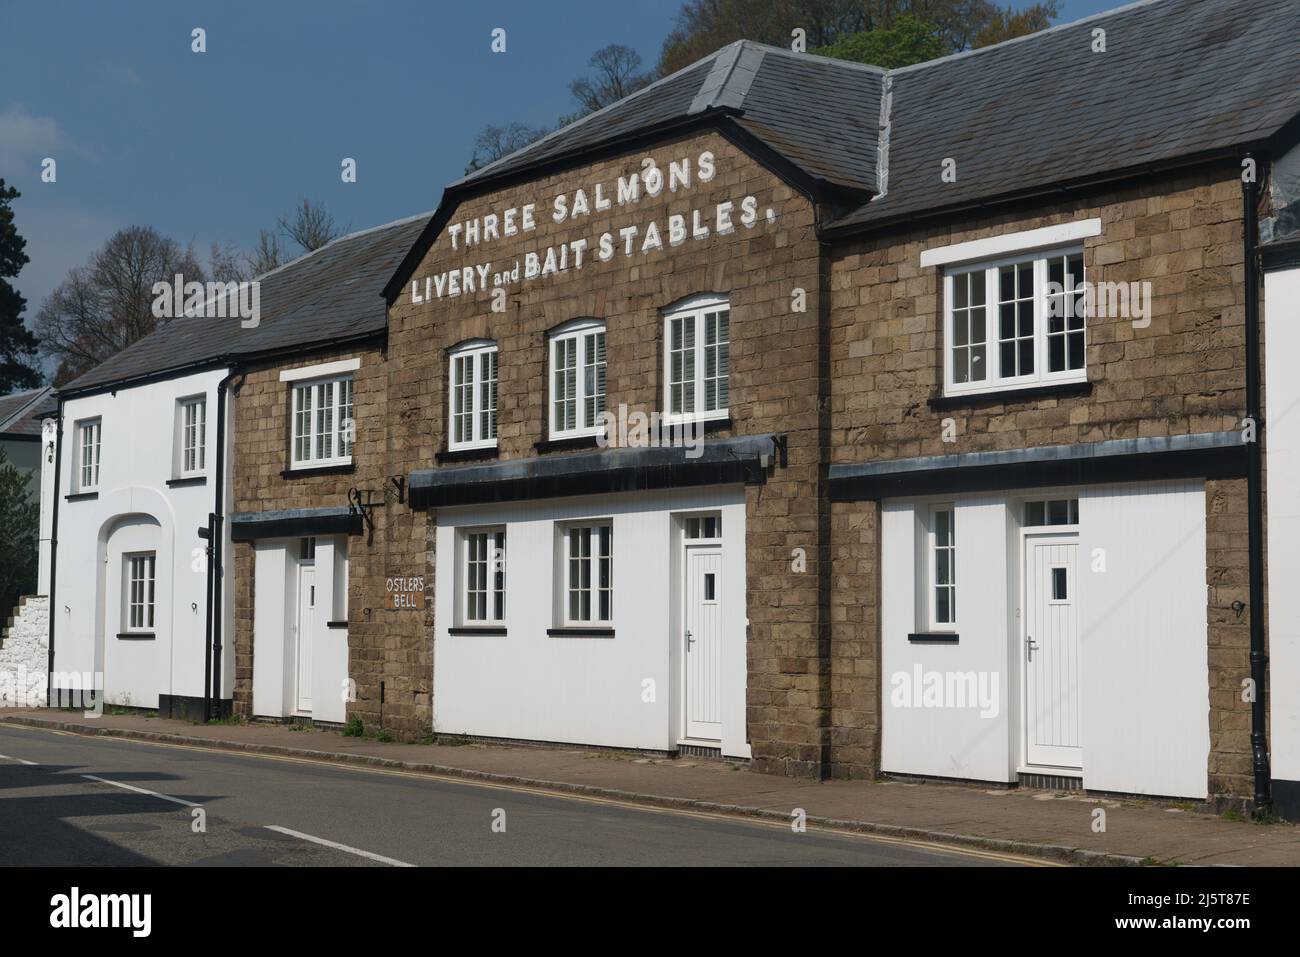 Former Livery and Bait Stables at the The Three Salmons Hotel. A Grade II Listed Building in Usk, Monmouthshire. Stock Photo